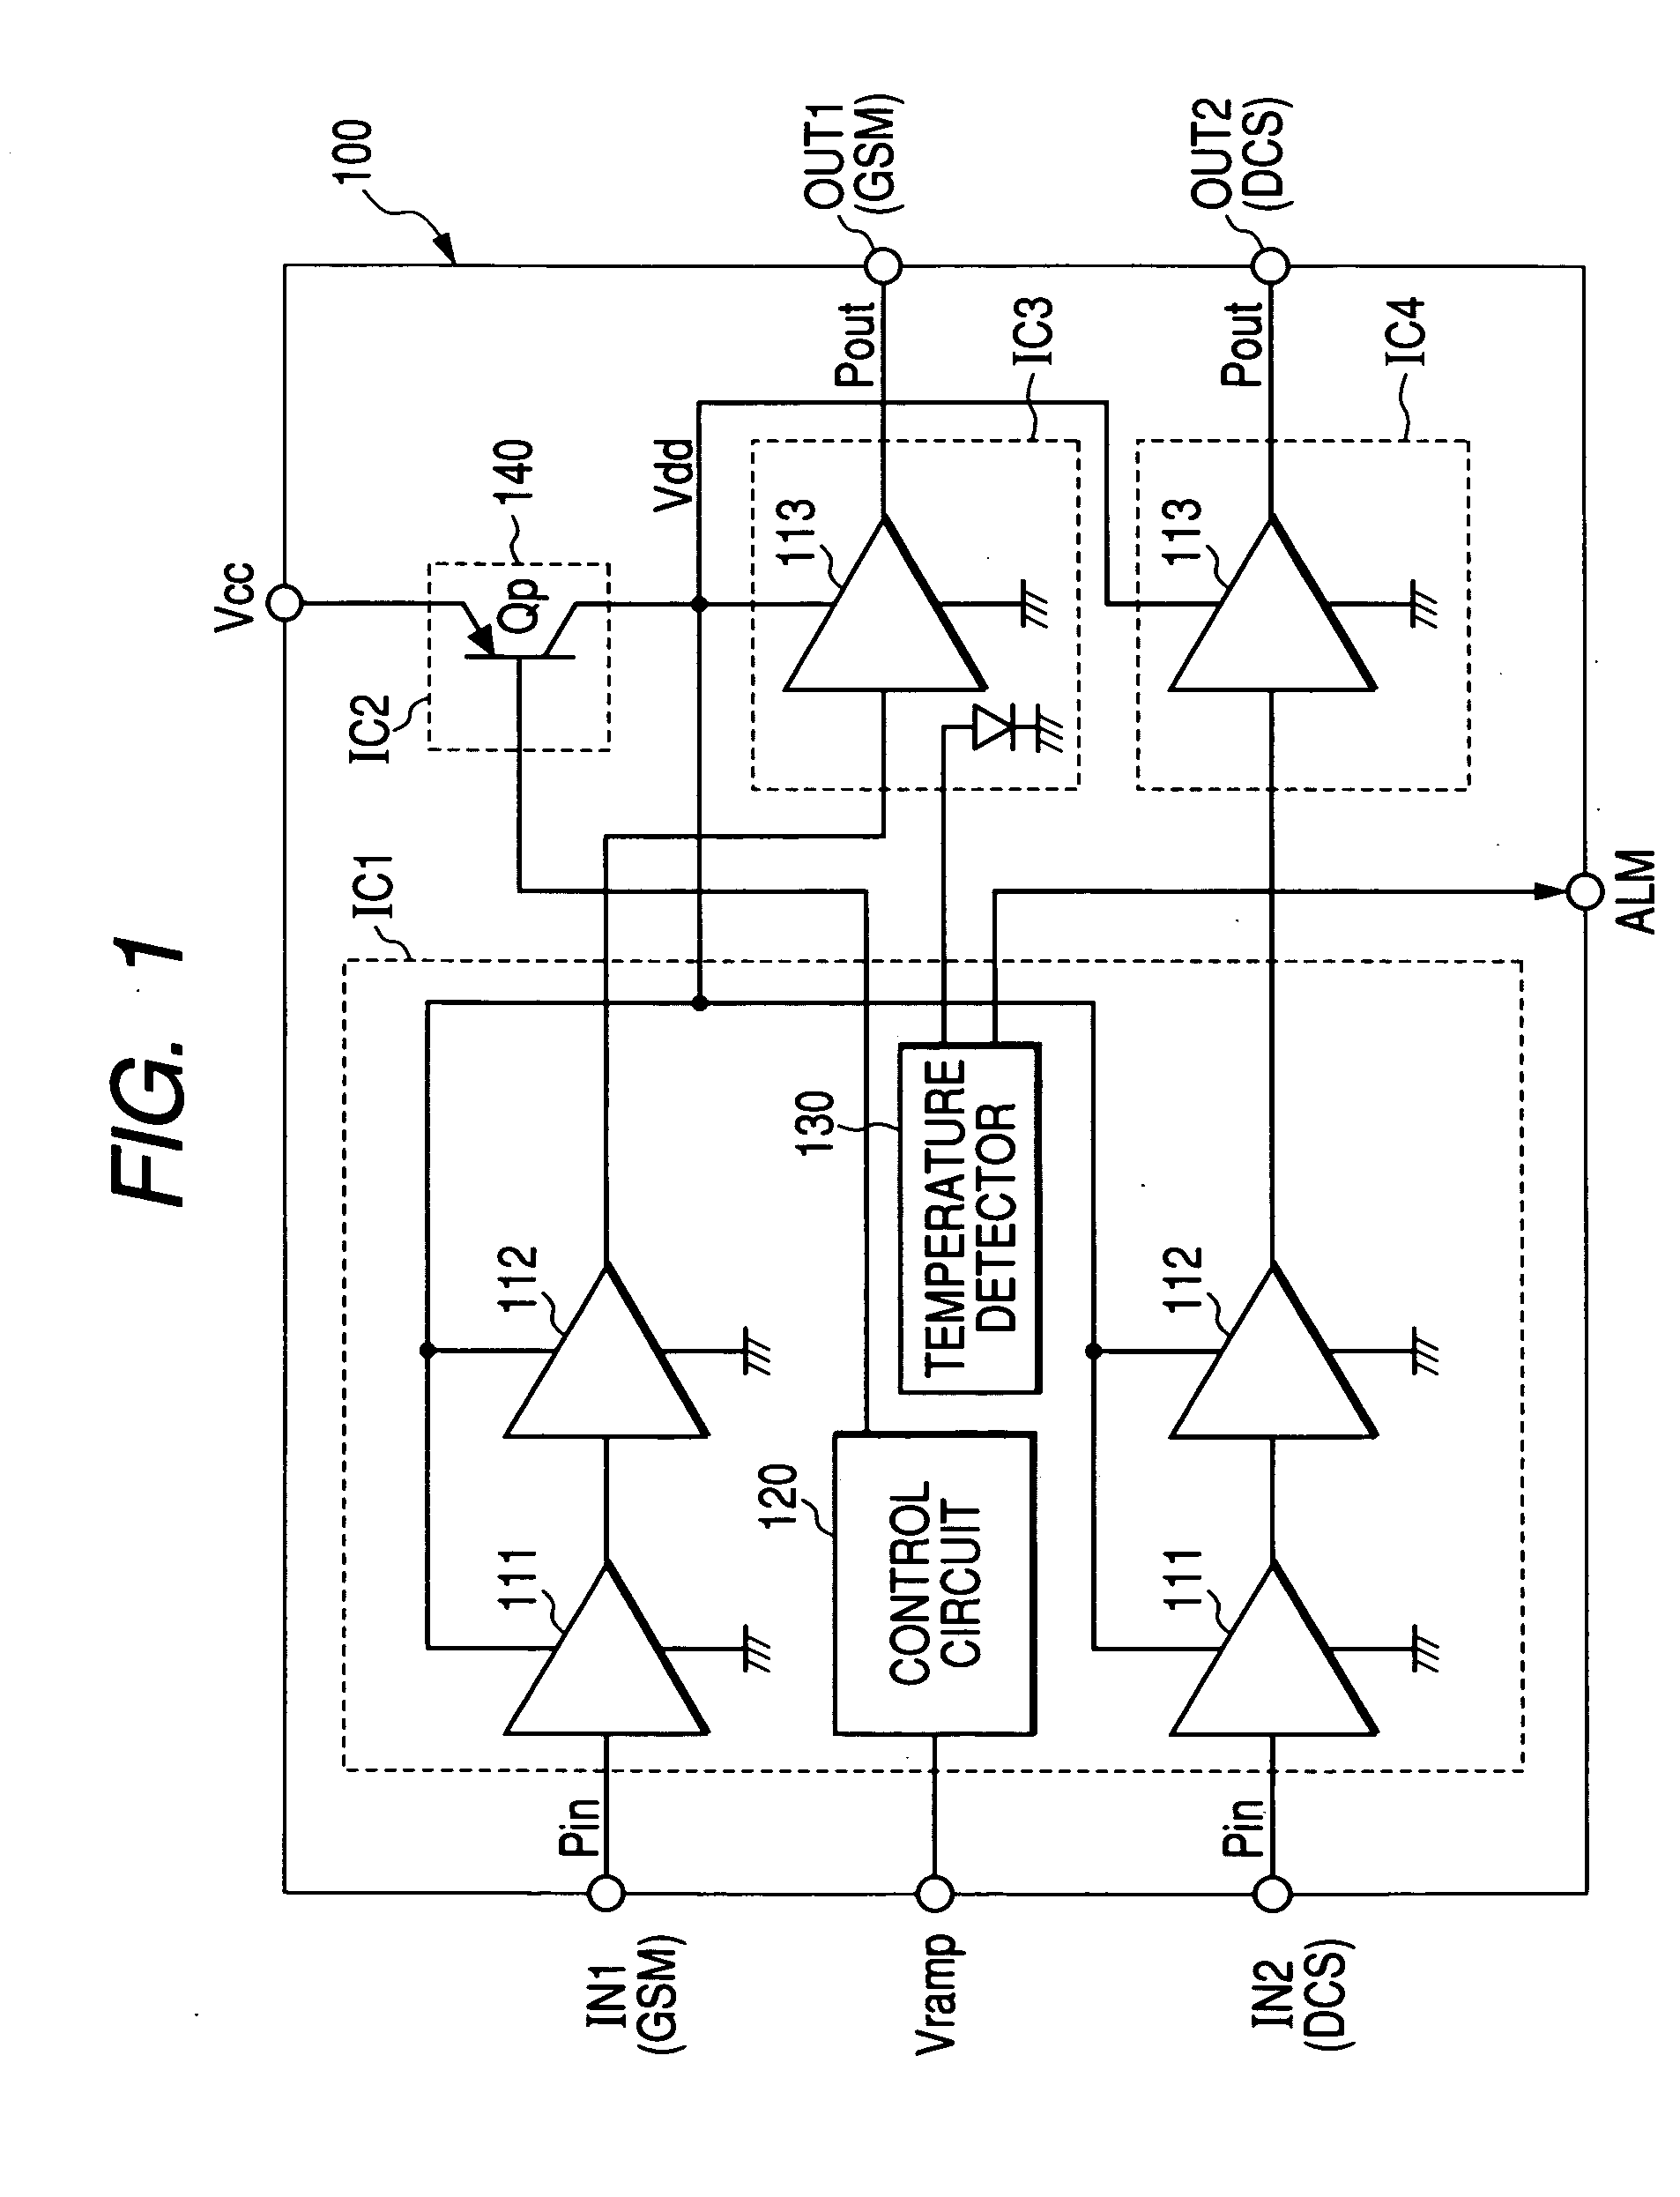 Electric component for high frequency power amplifier